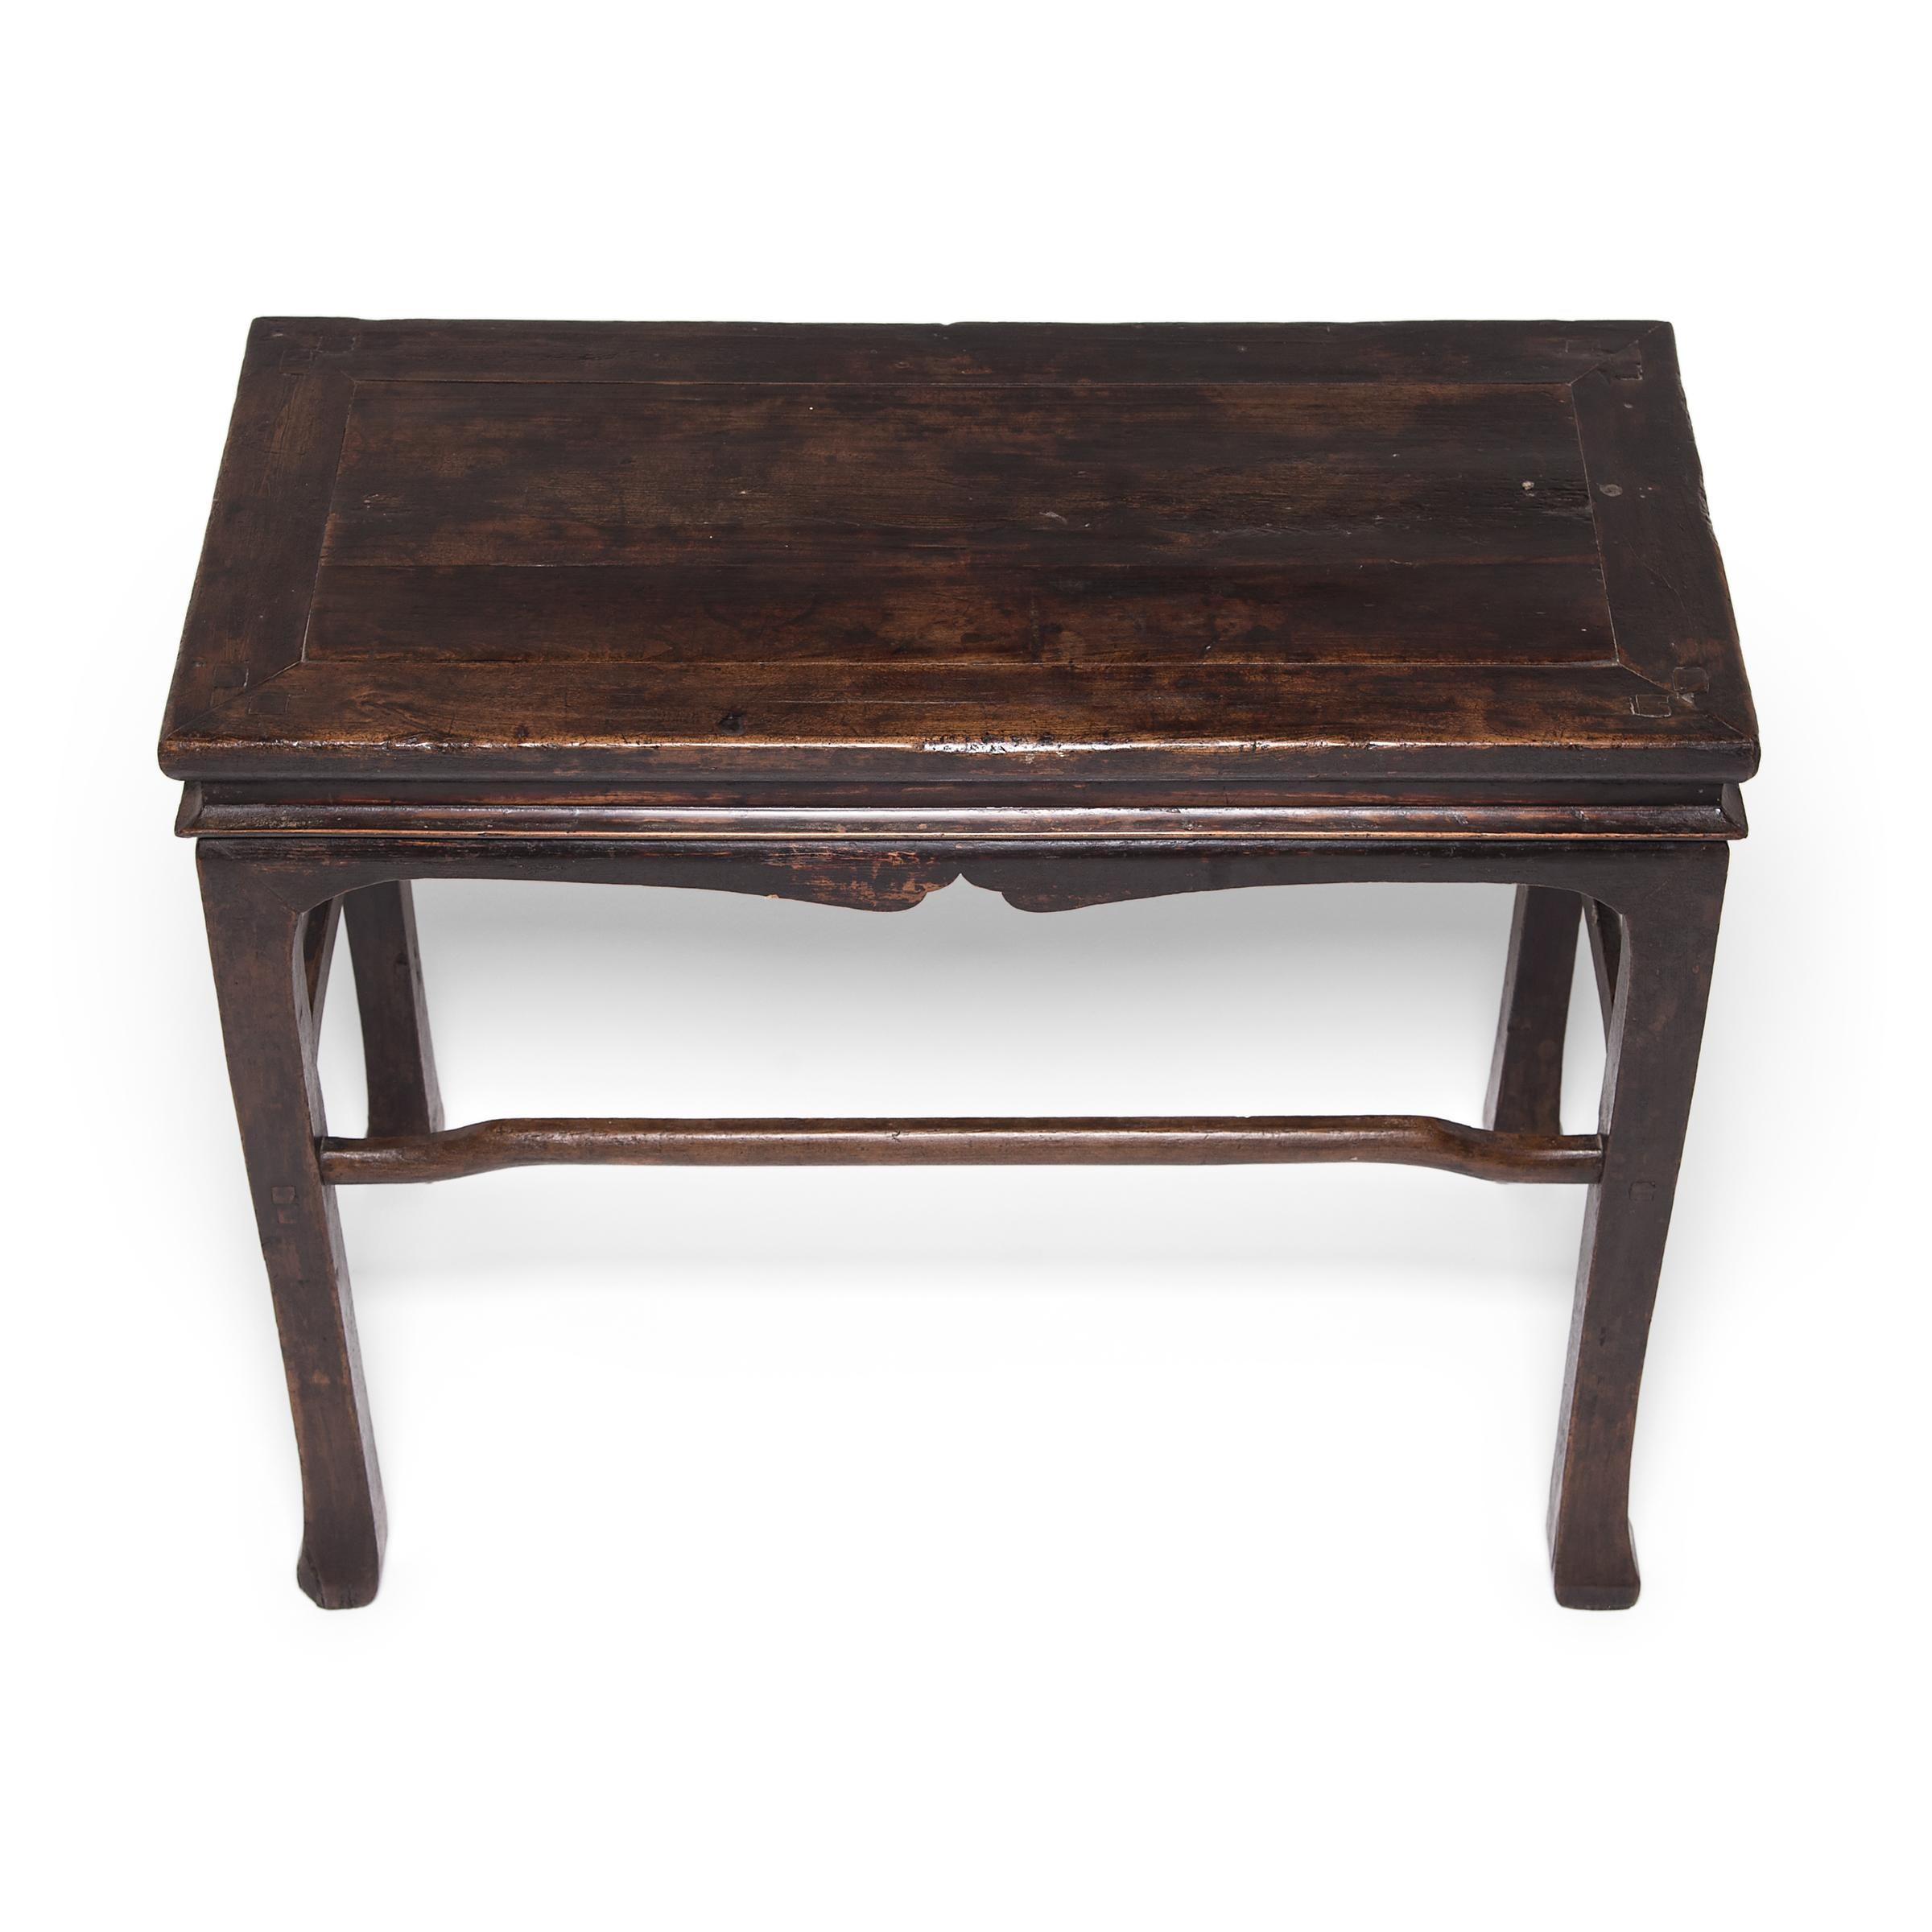 Qing Console Table with Humpback Stretchers